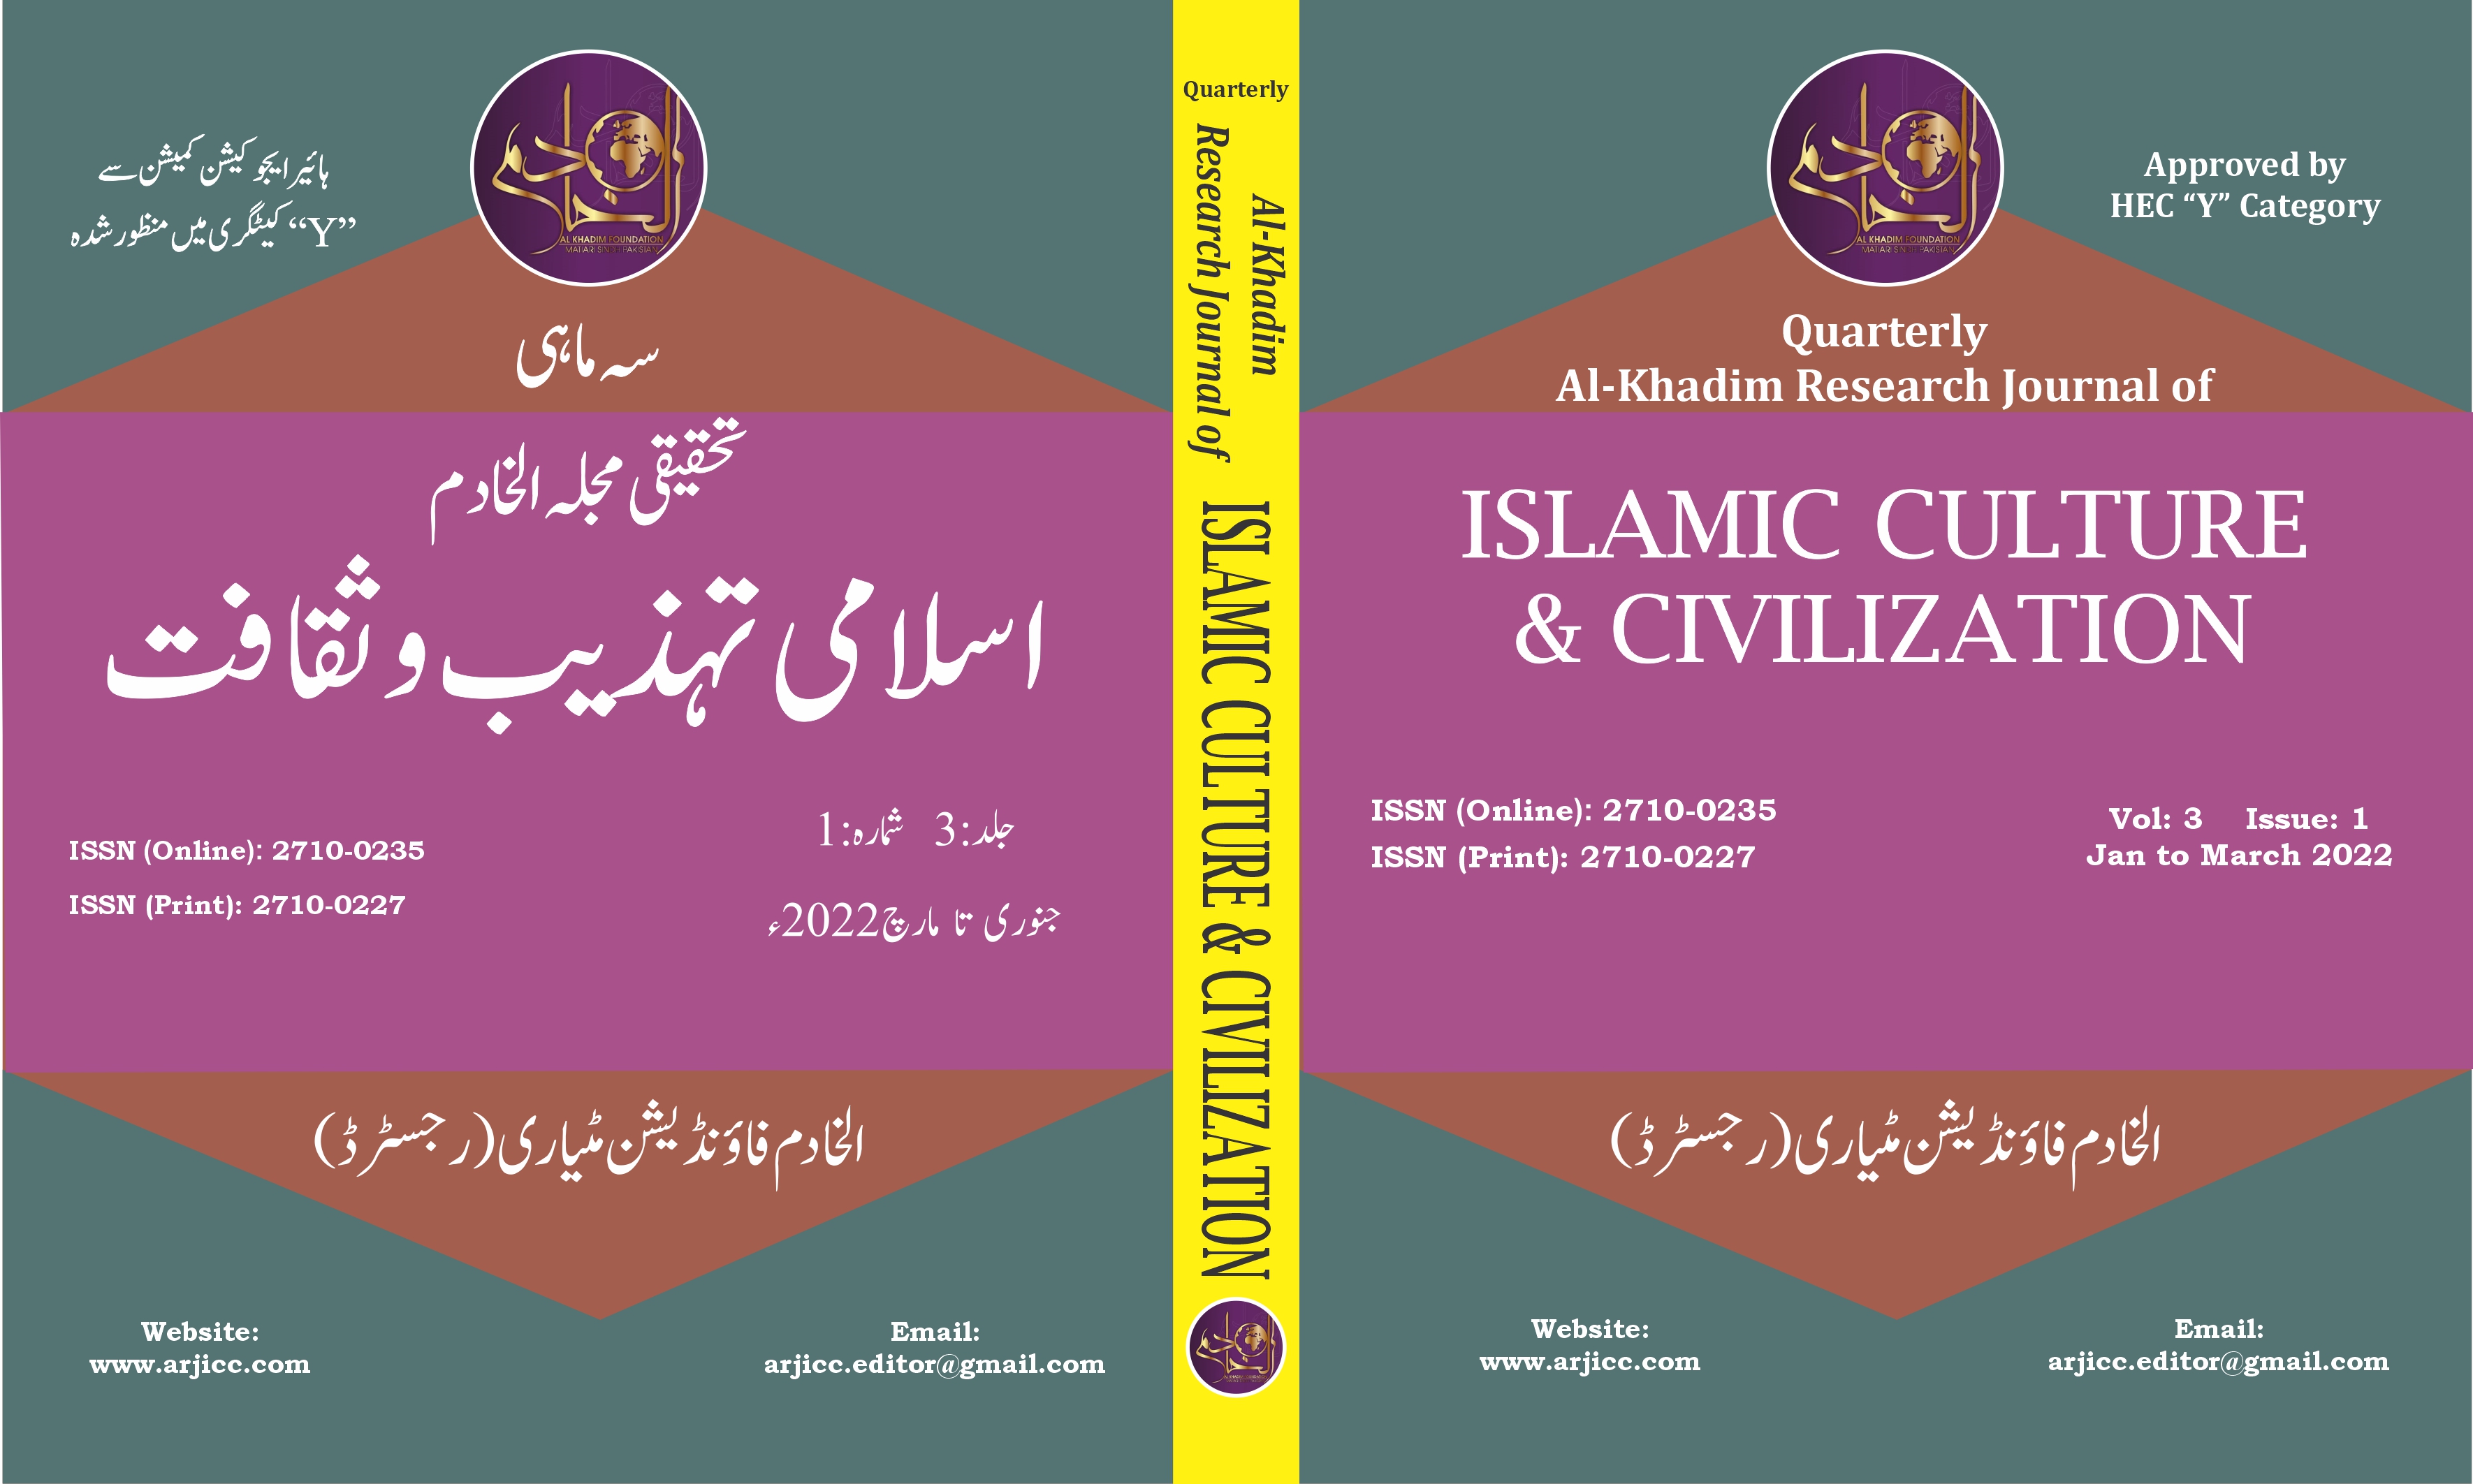 					View Vol. 3 No. 1 (2022): Al Khadim Research journal of Islamic culture and Civilization(January to March 2022)
				